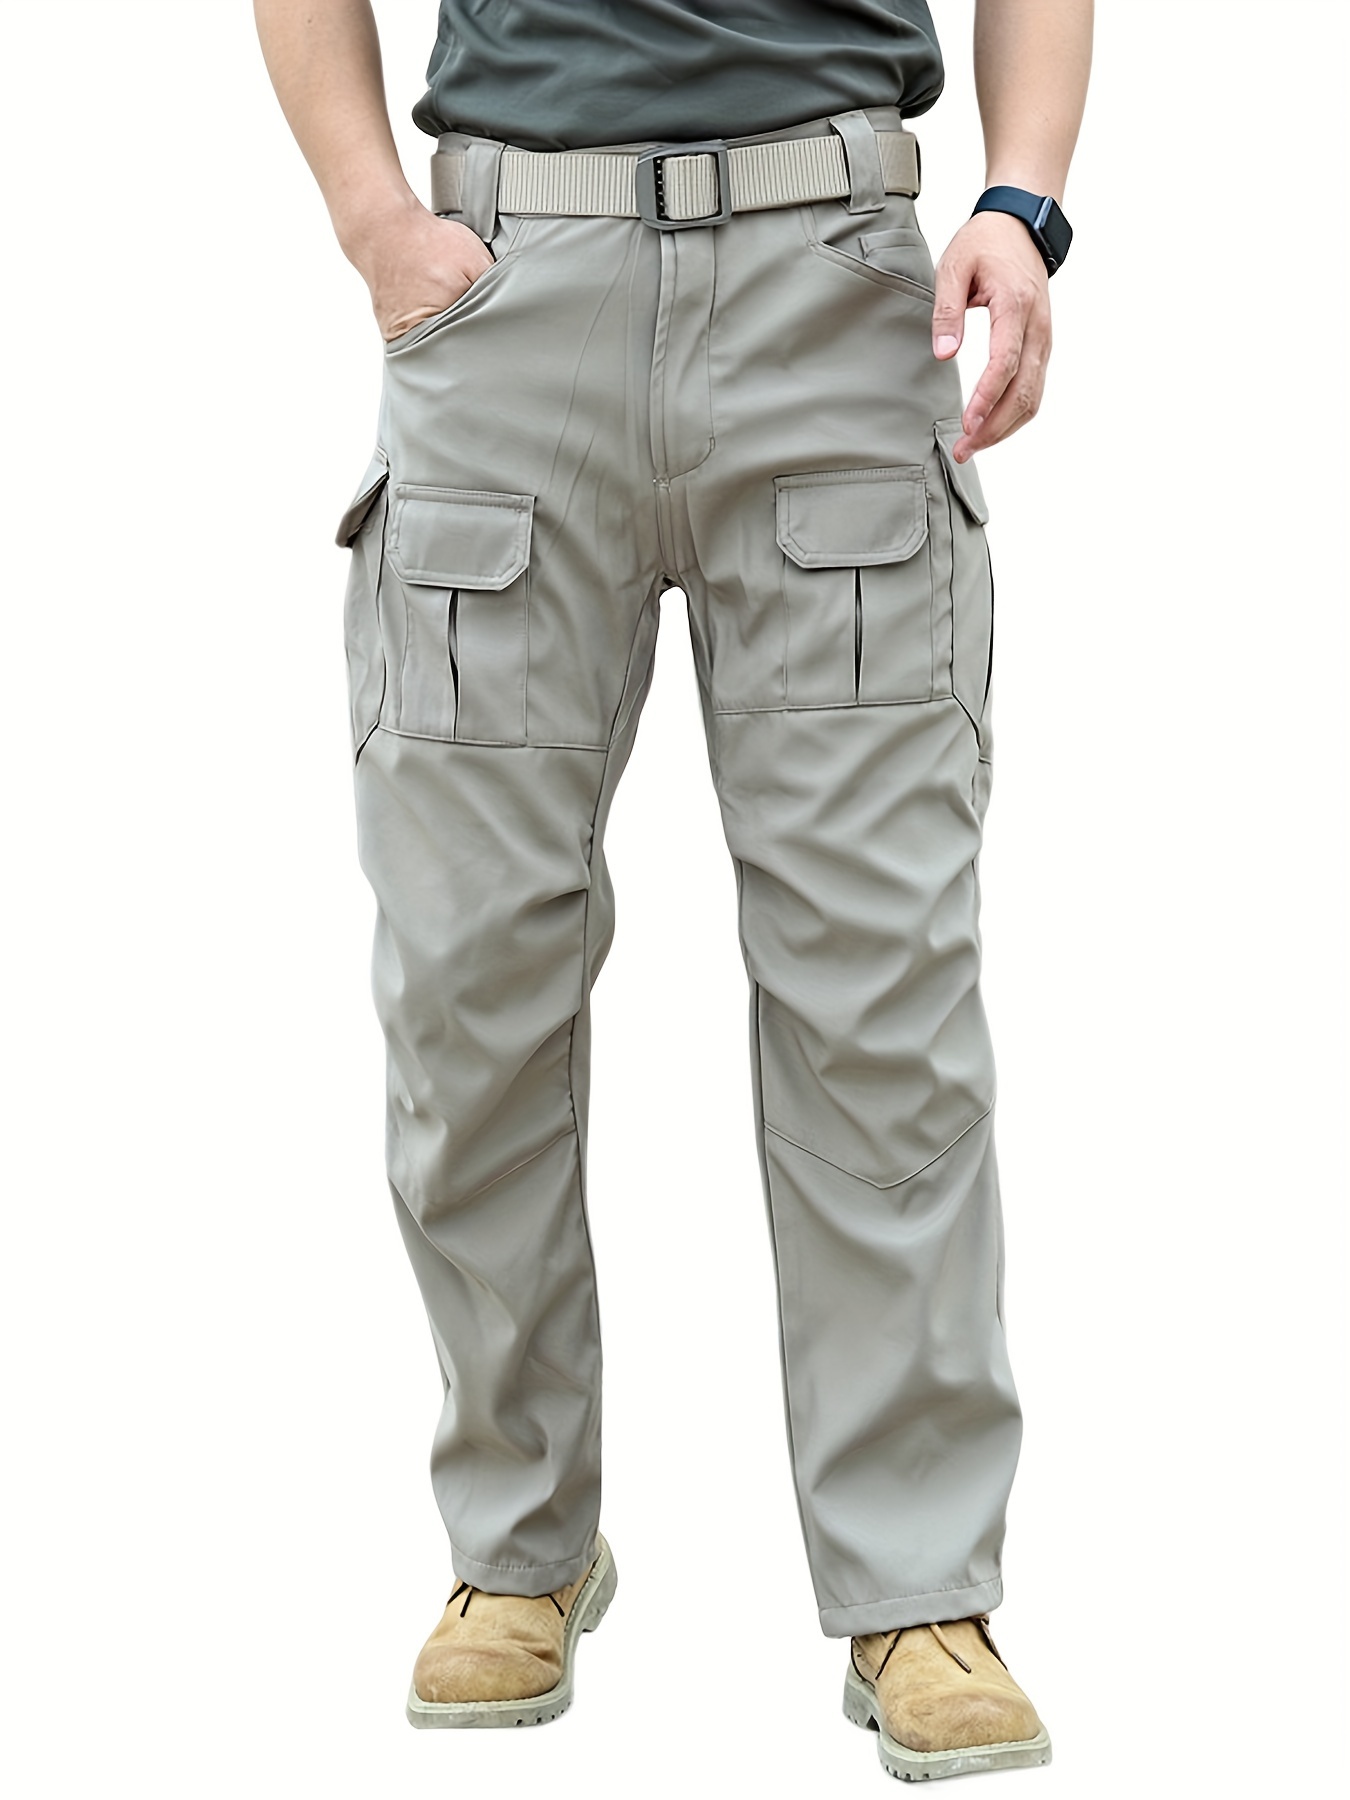 Outdoors Tactical Military Pants Training Cargo Pants Multi